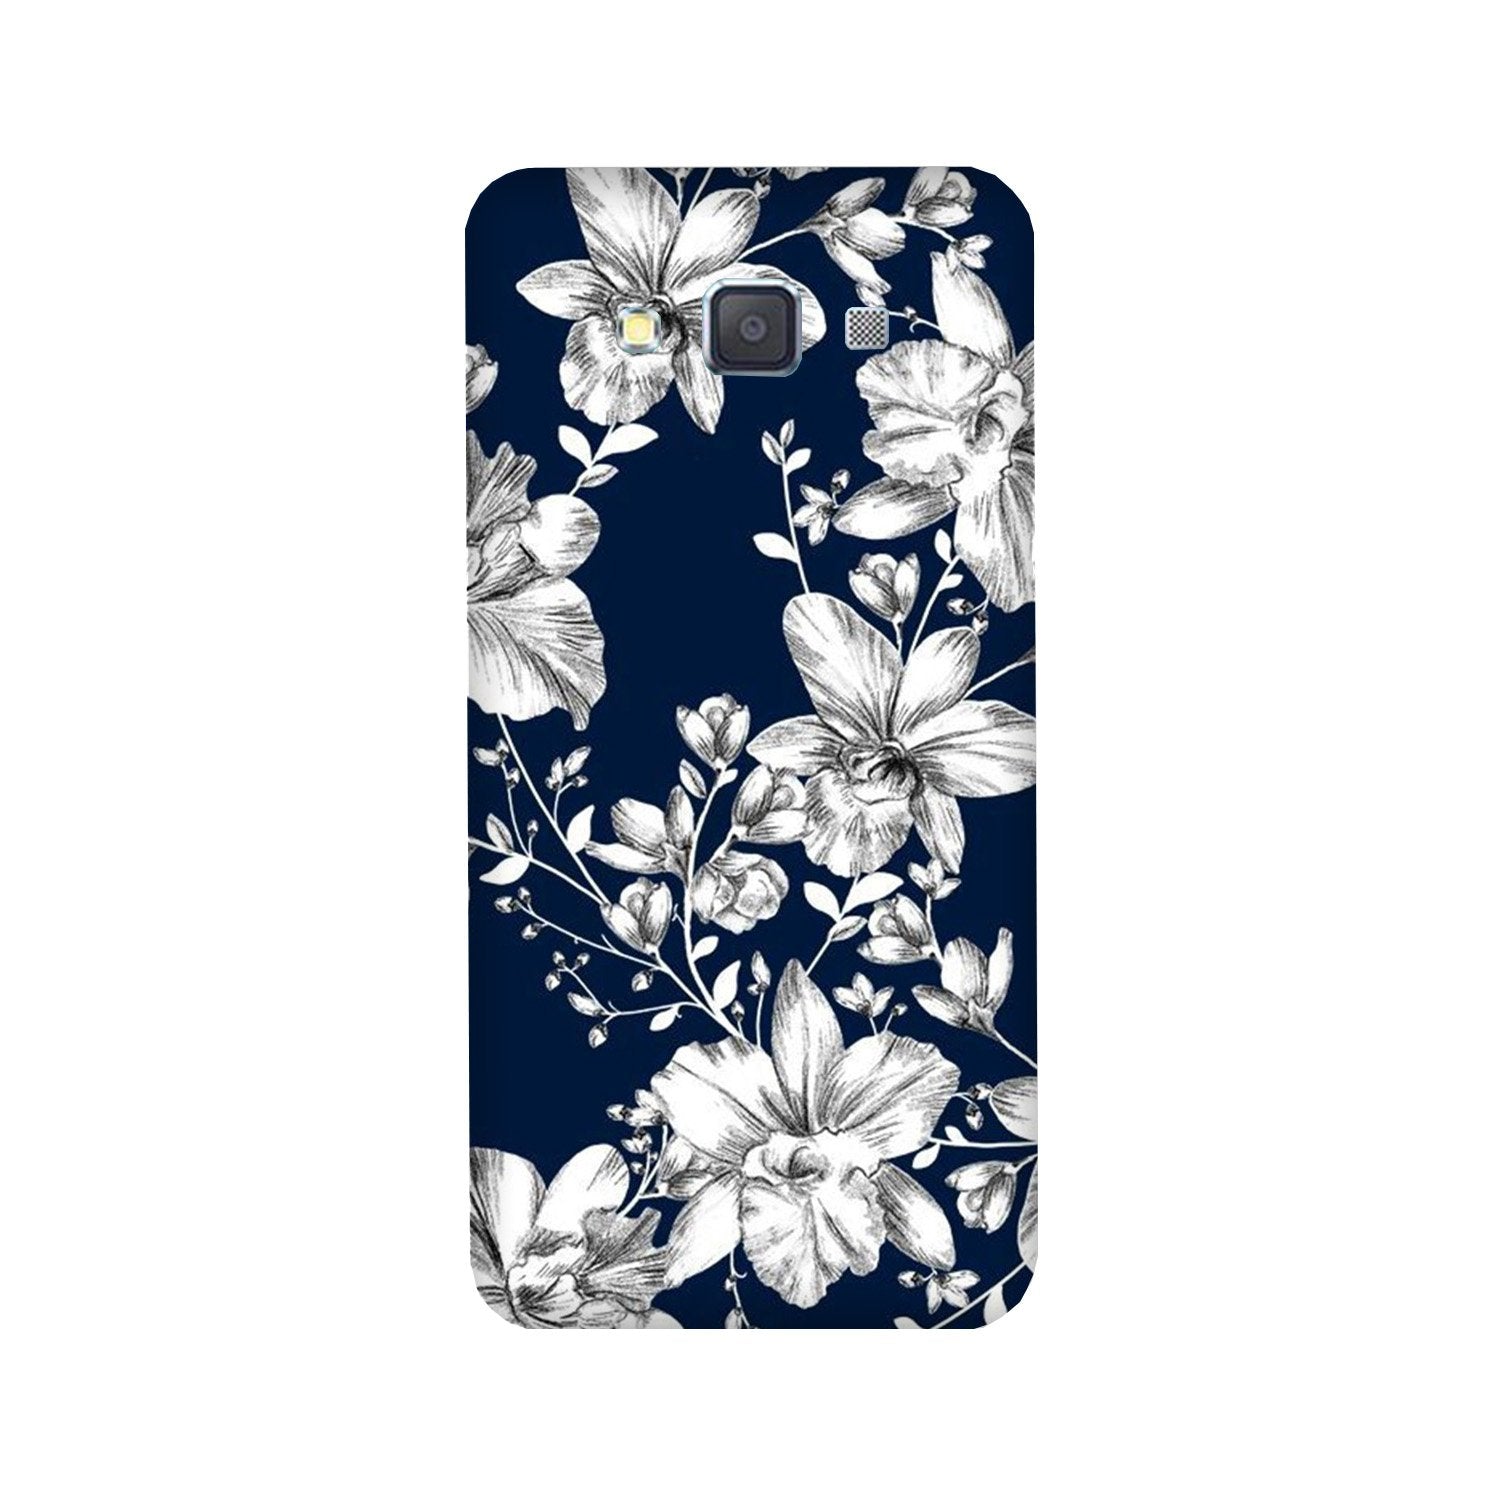 White flowers Blue Background Case for Galaxy ON7/ON7 Pro